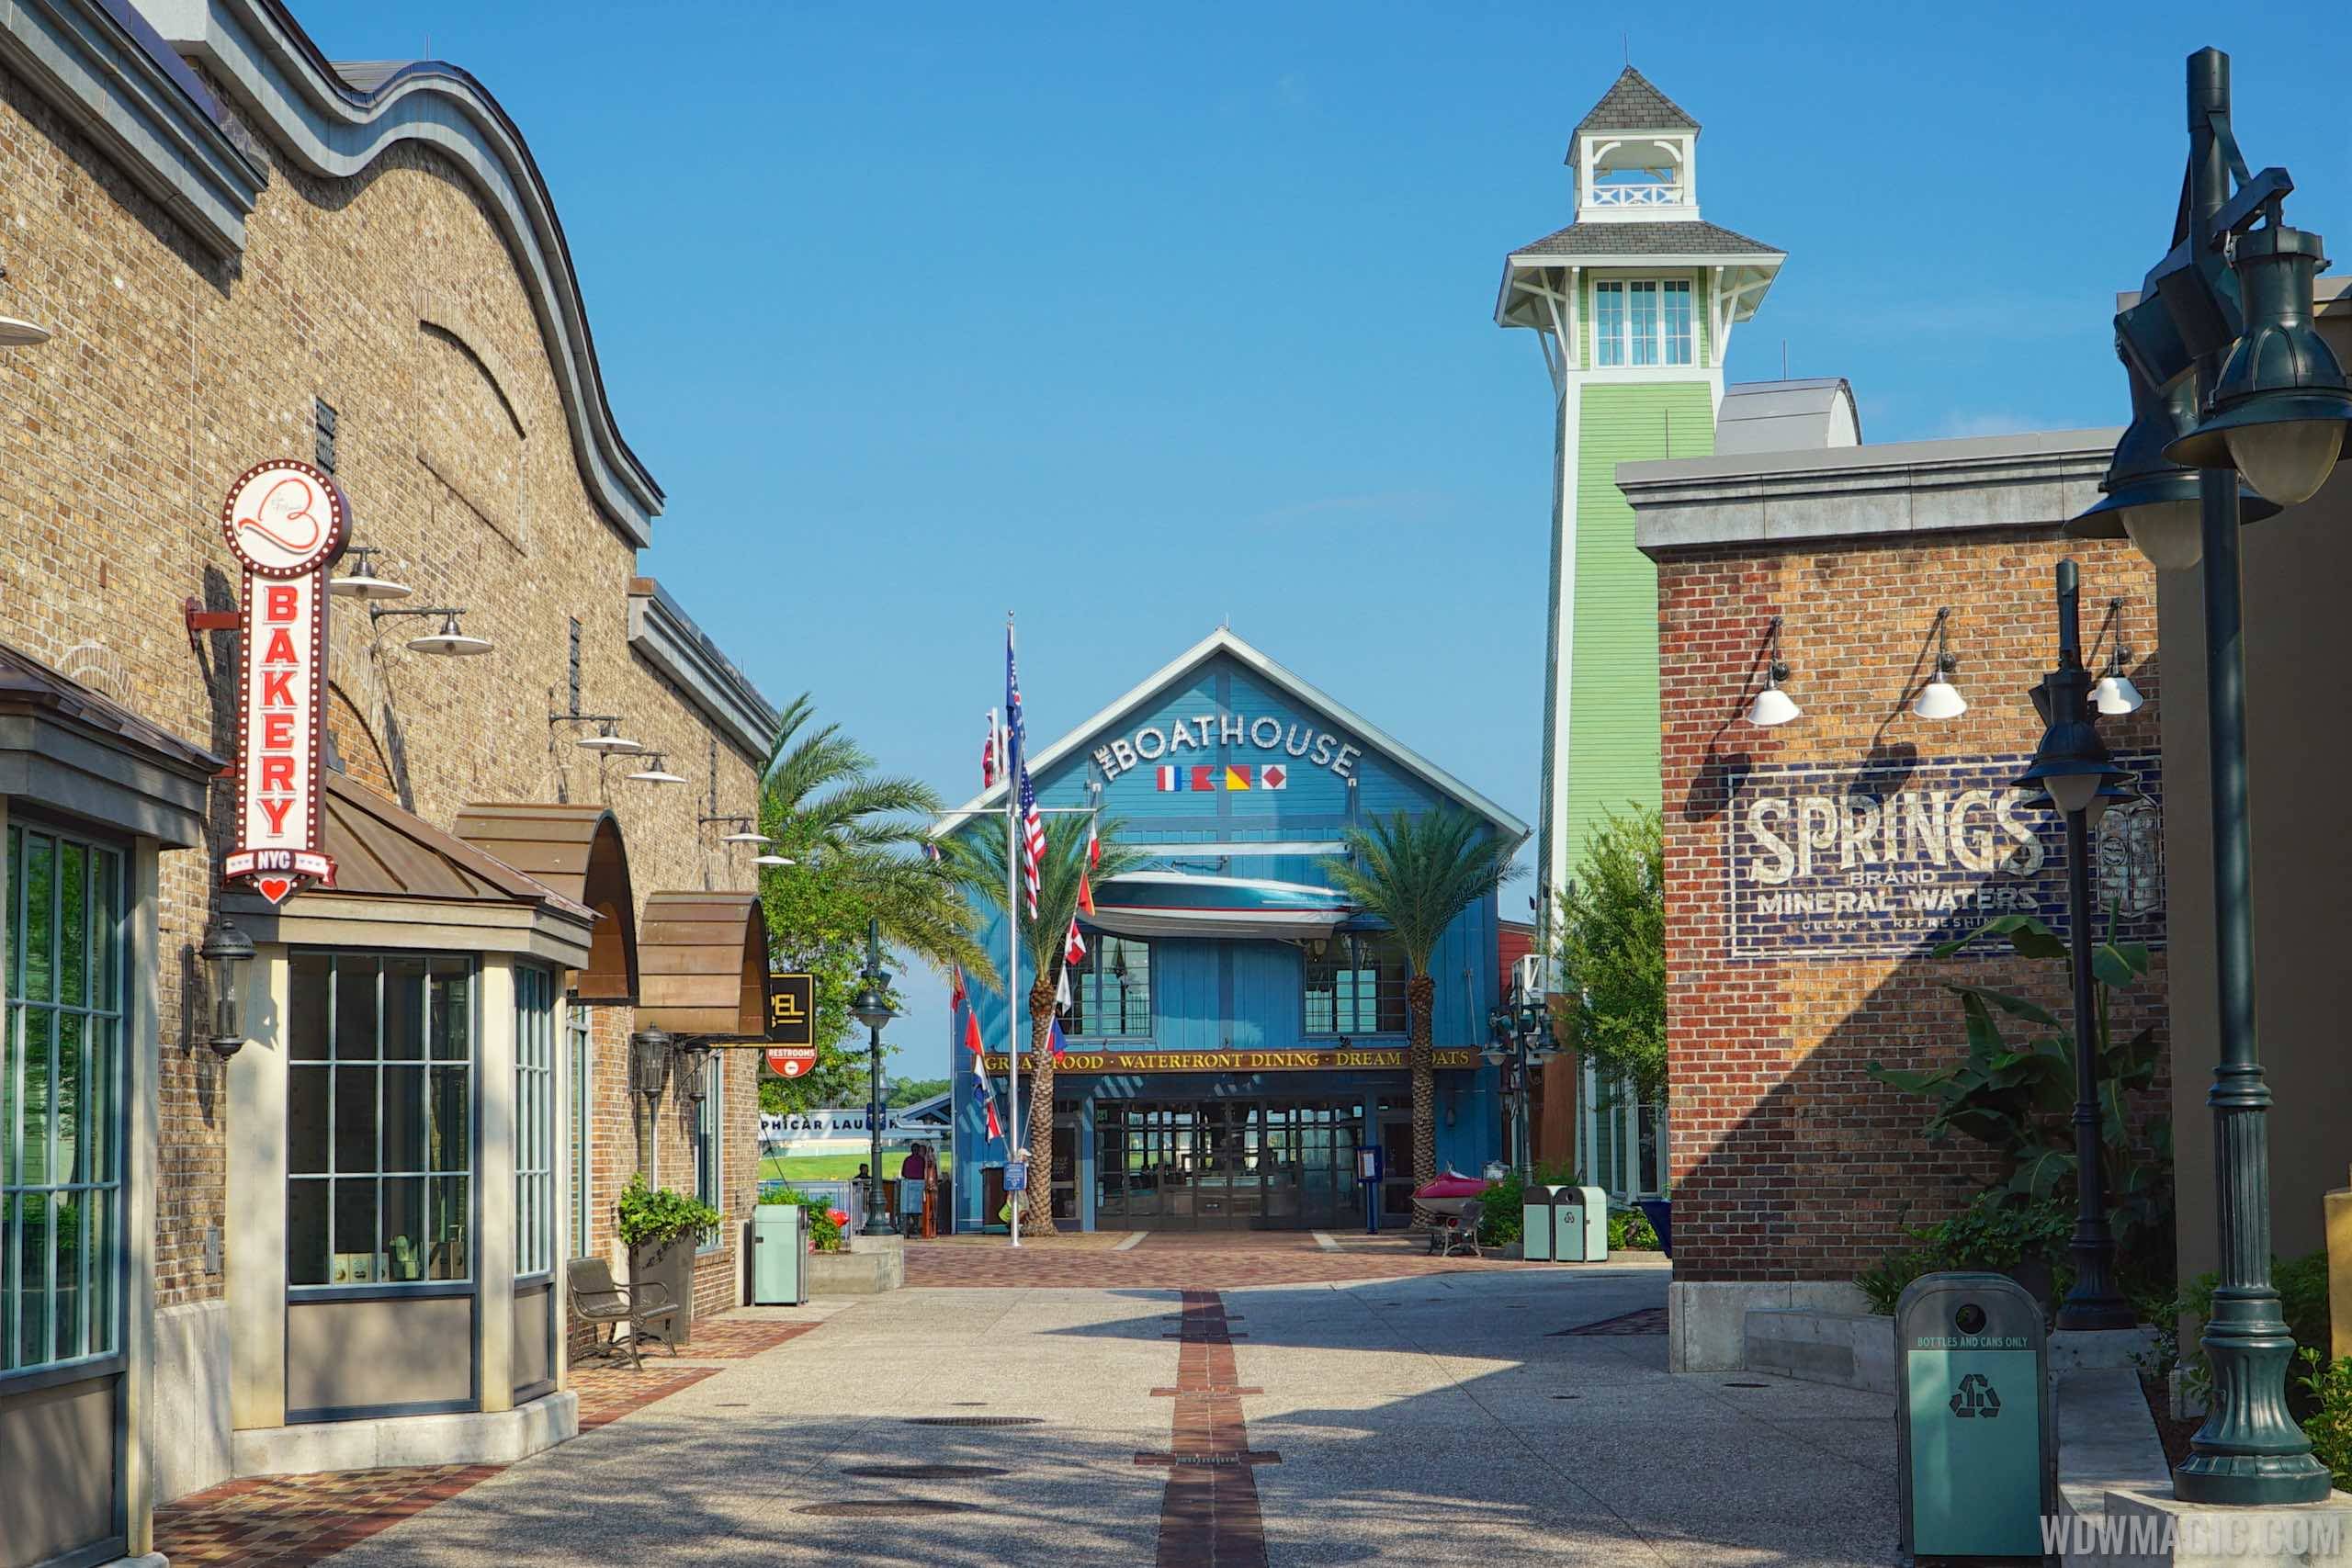 Disney Springs overview